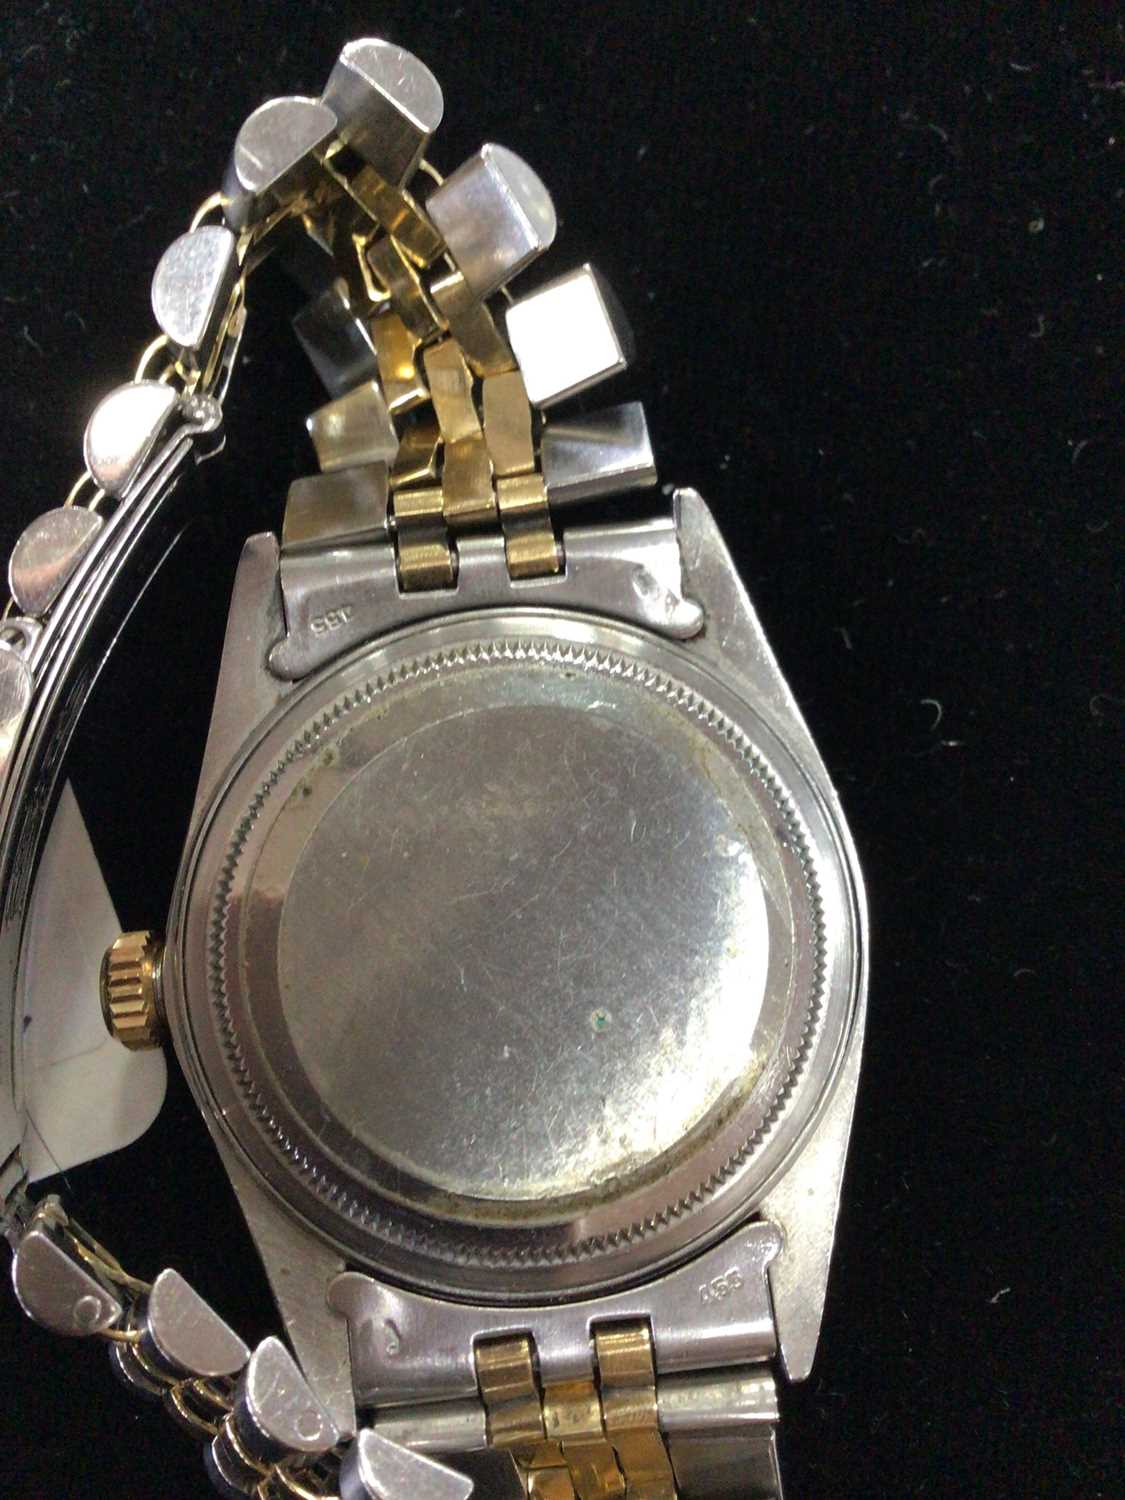 ROLEX OYSTER PERPETUAL DATEJUST STAINLESS STEEL AUTOMATIC WRIST WATCH - Image 6 of 8